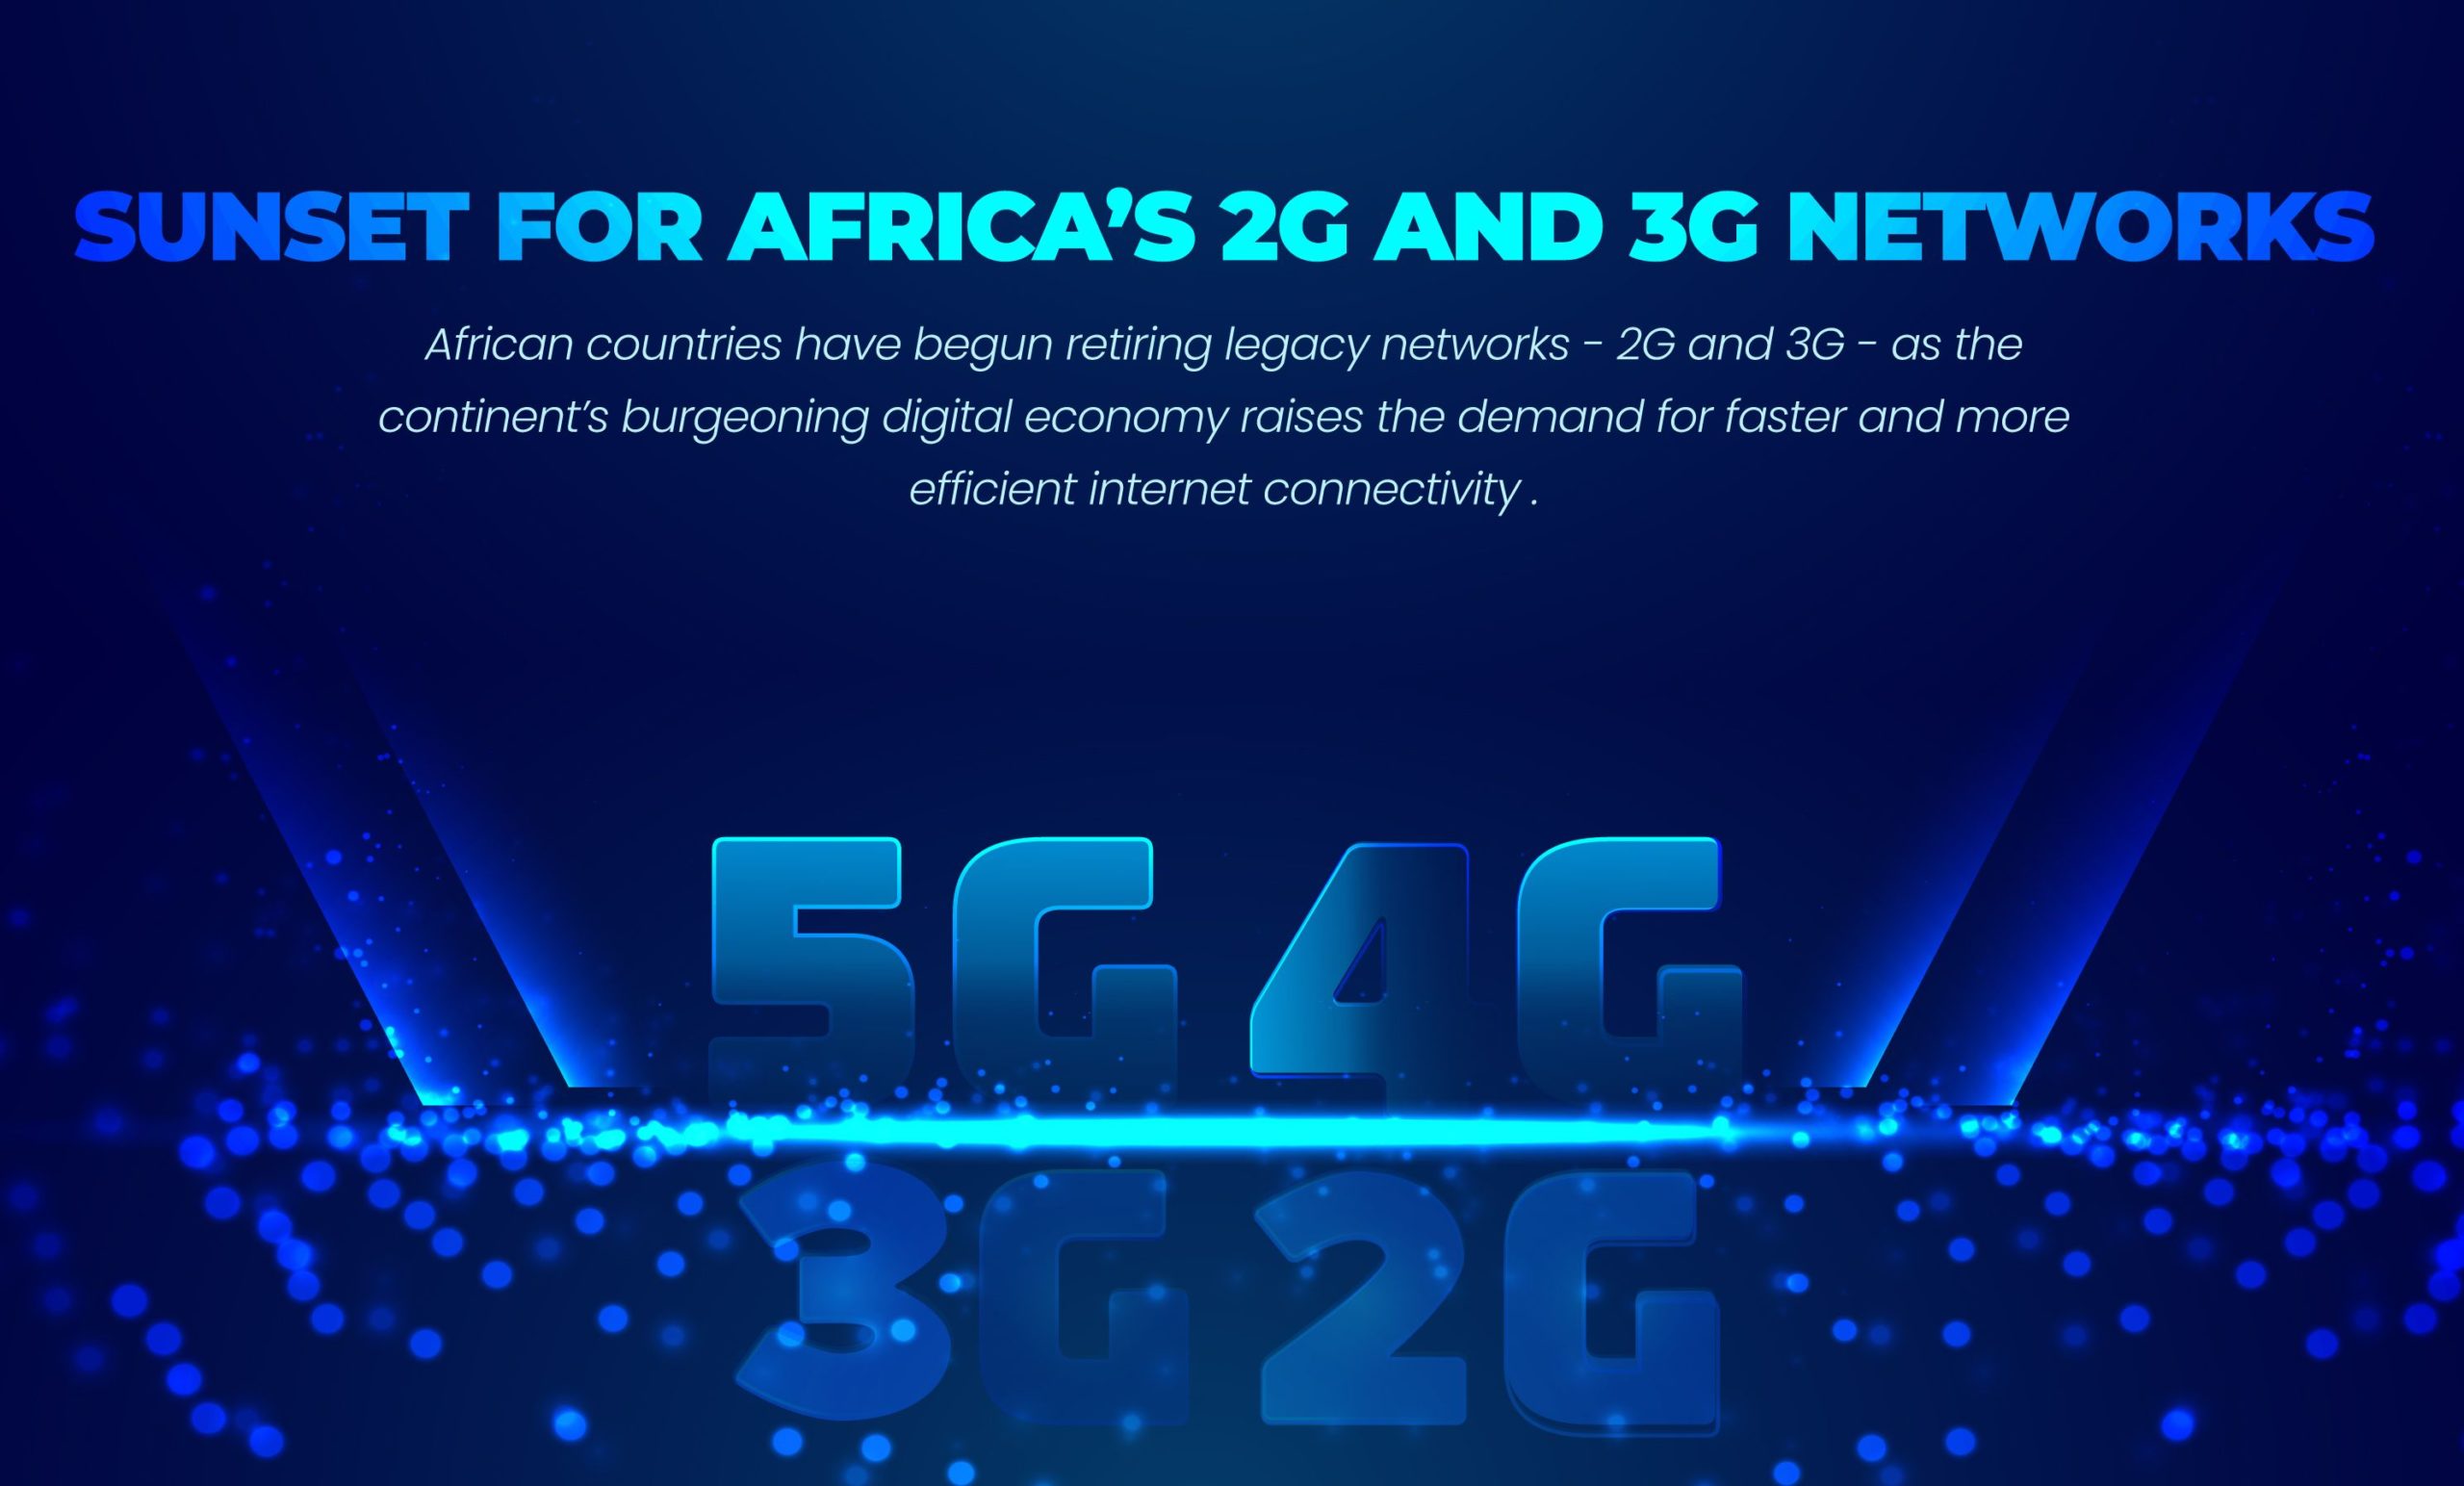 Sundown for Africa’s 2G and 3G networks looming